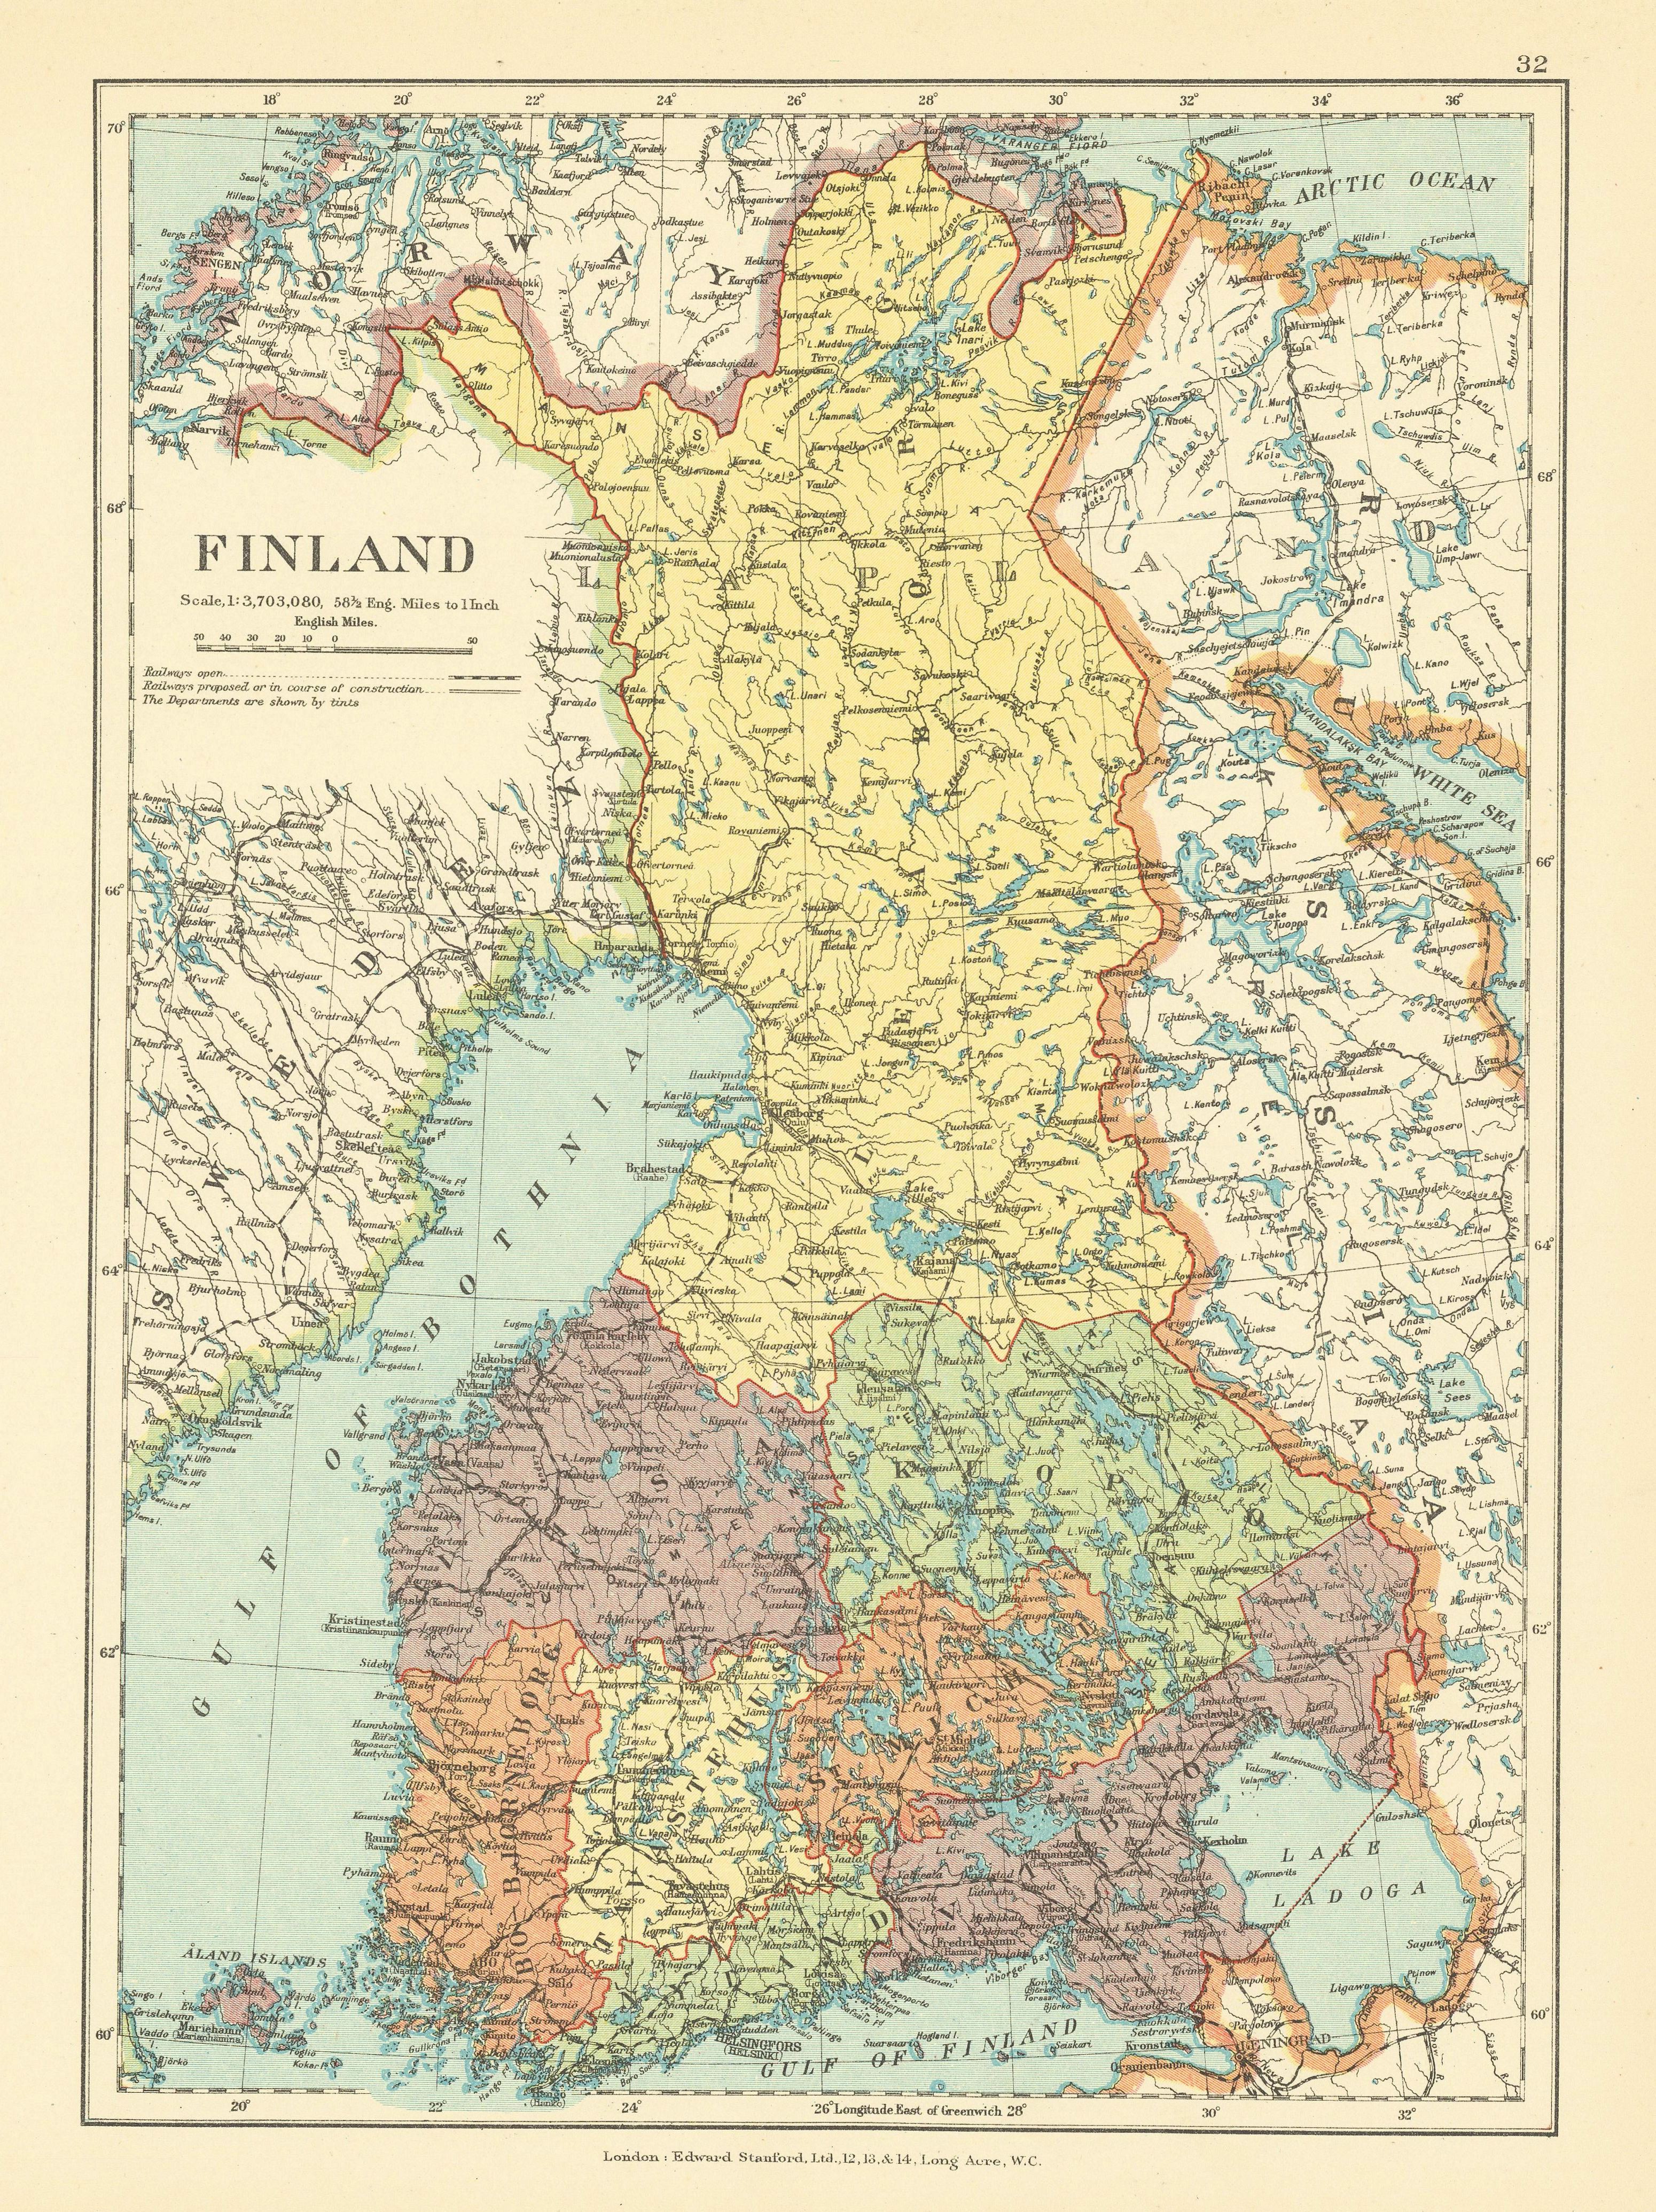 Finland. Pre WW2 borders with Russia. Gulf of Bothnia. STANFORD c1925 old map